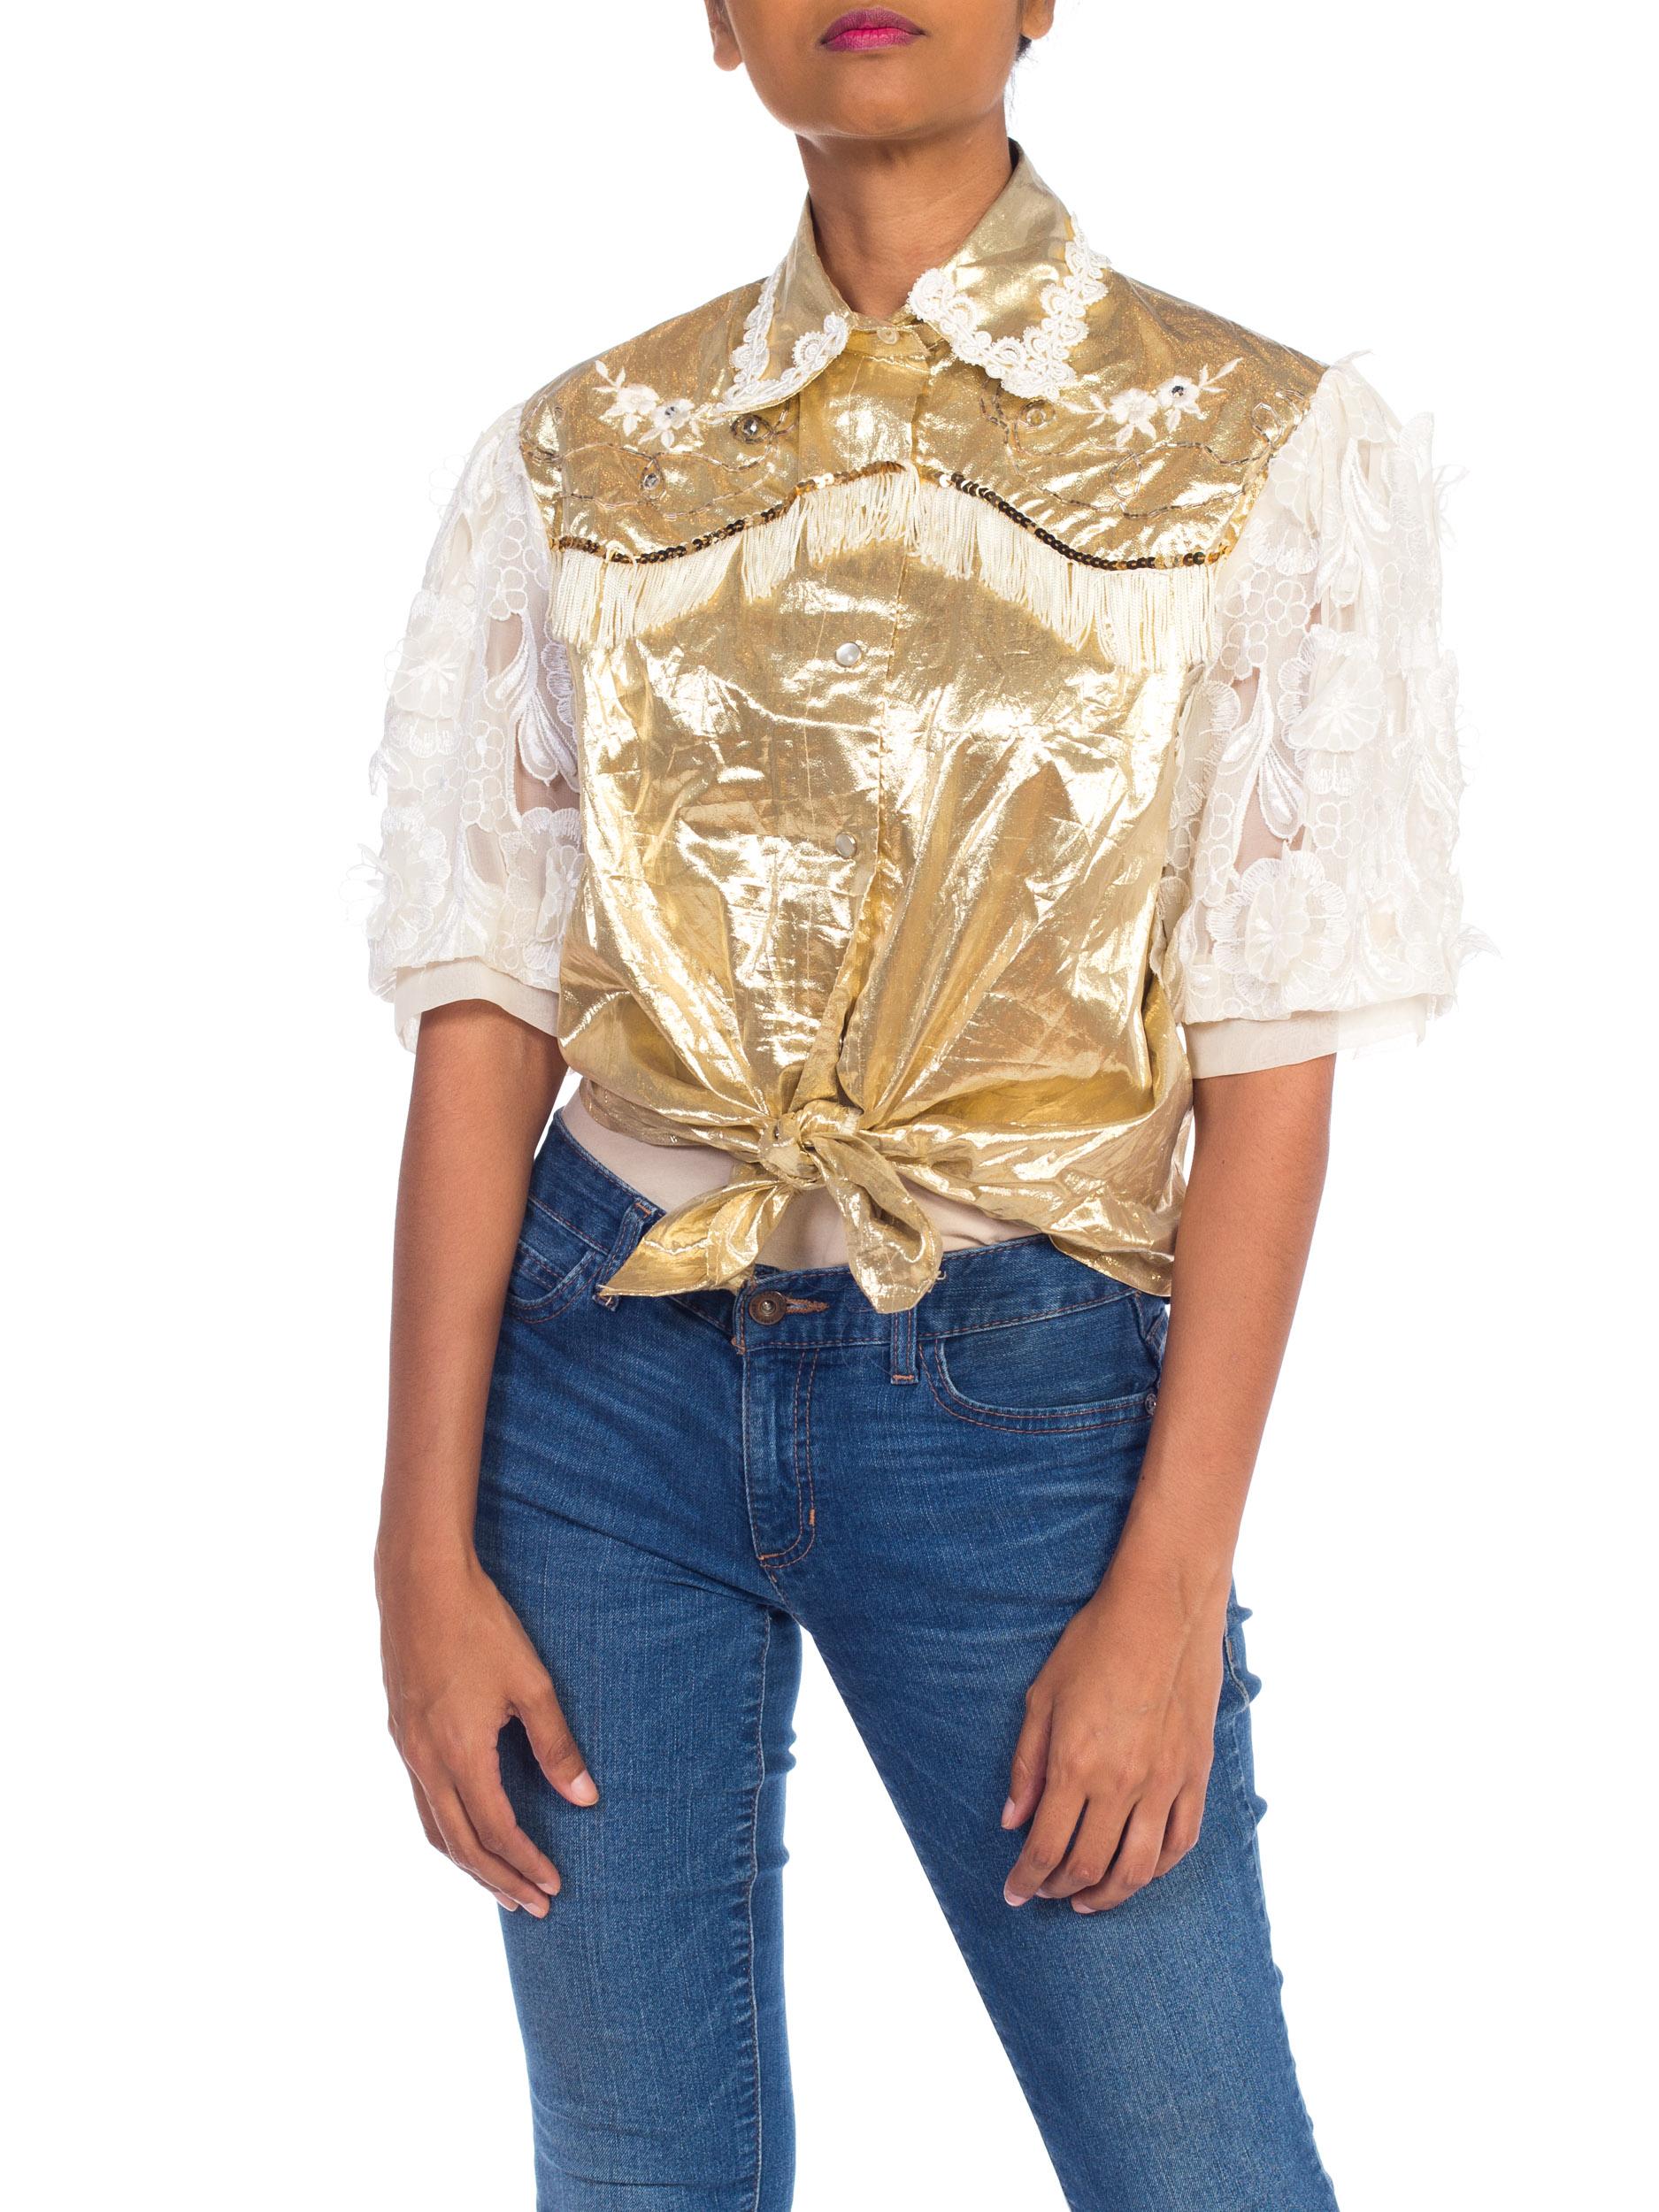 Gold Lamé & Lace Western Top with Fringe 3